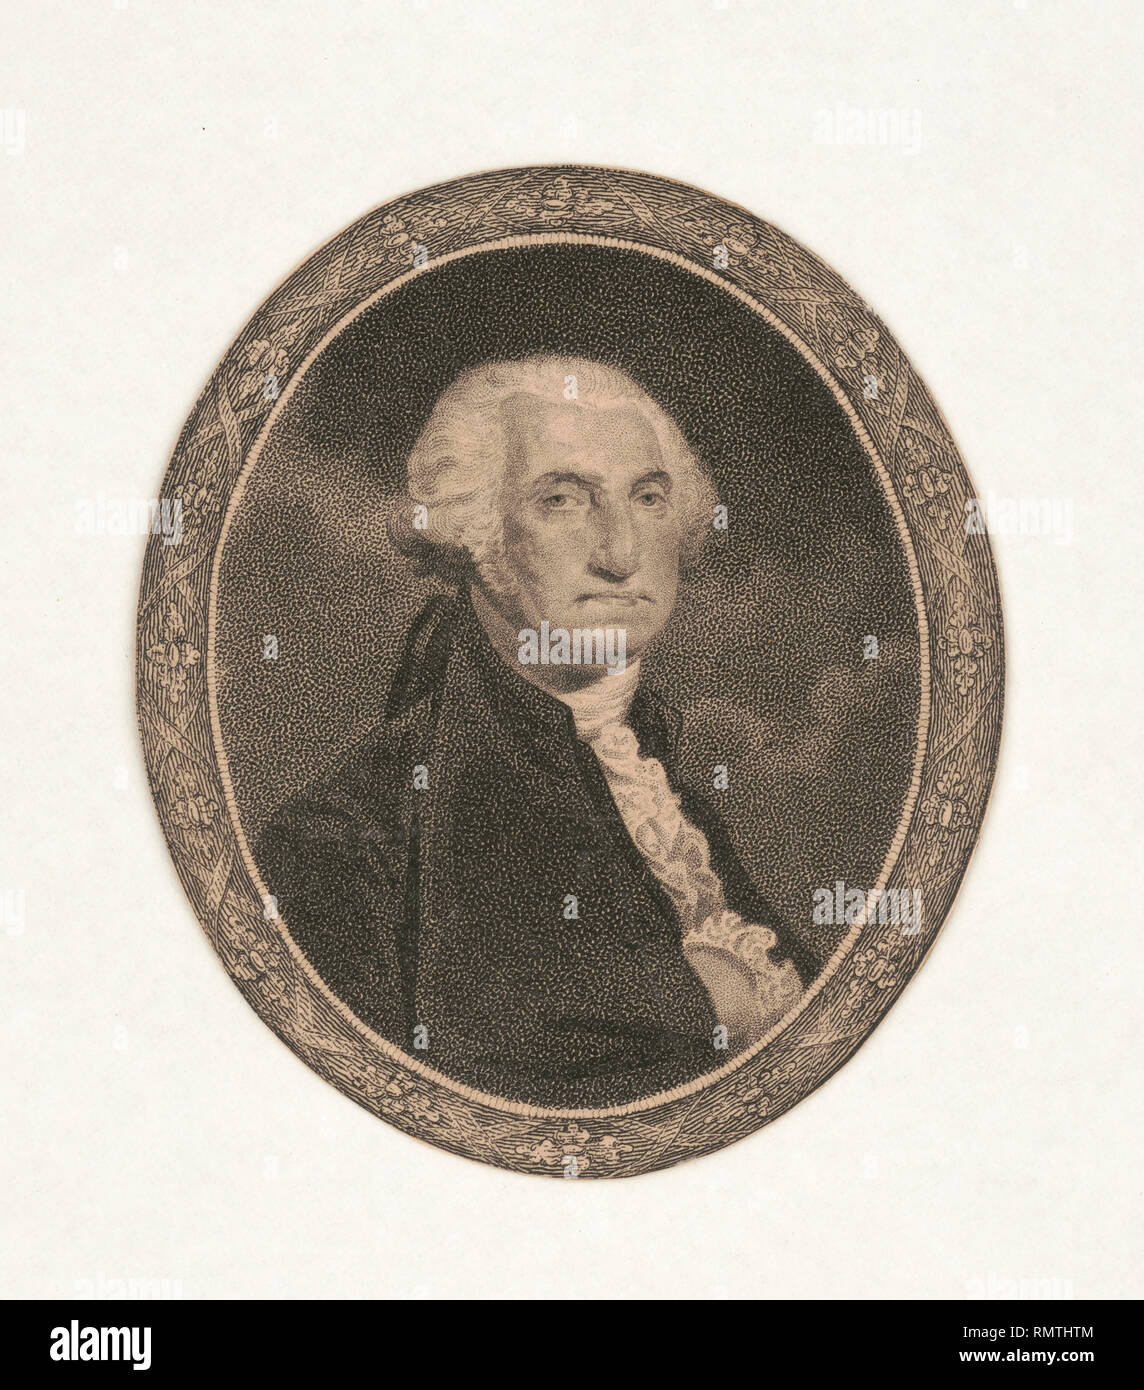 George Washington (1732-99) First President of the United States, Half-Length Portrait, Engraving Stock Photo